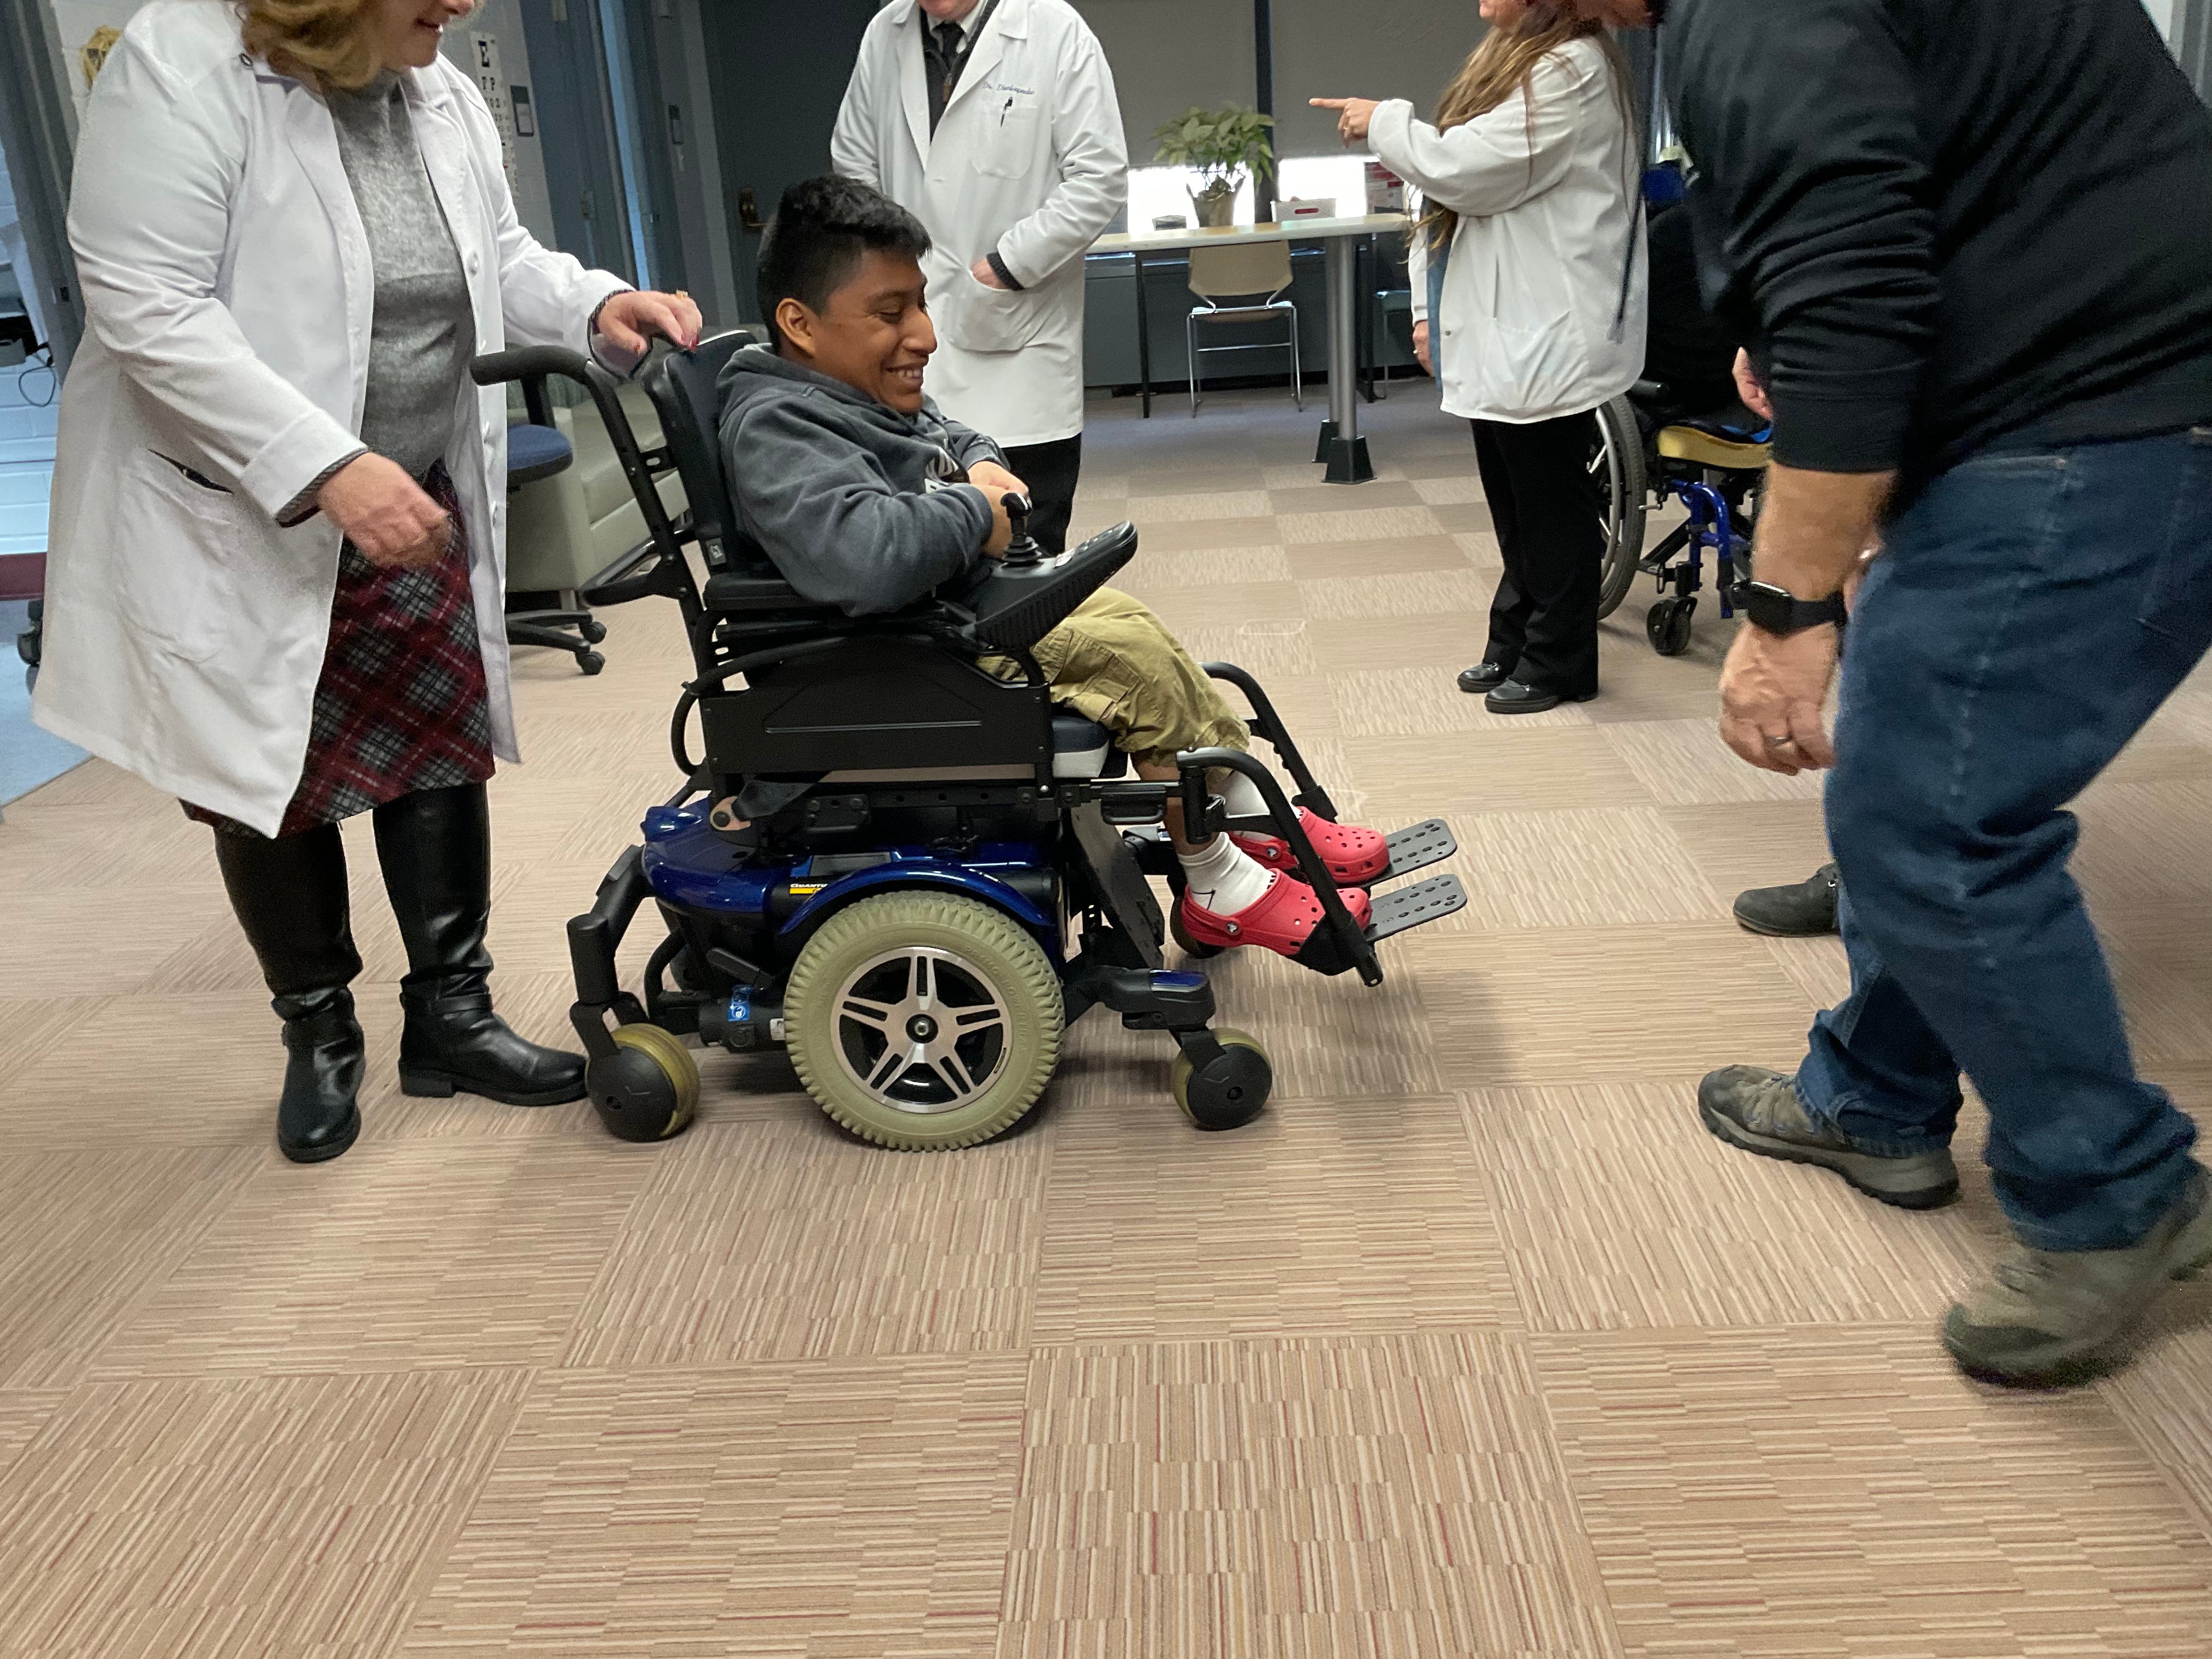 Christian, surrounded by Browne Hall doctors and a mechanic, smiling and looking excited for his new power chair